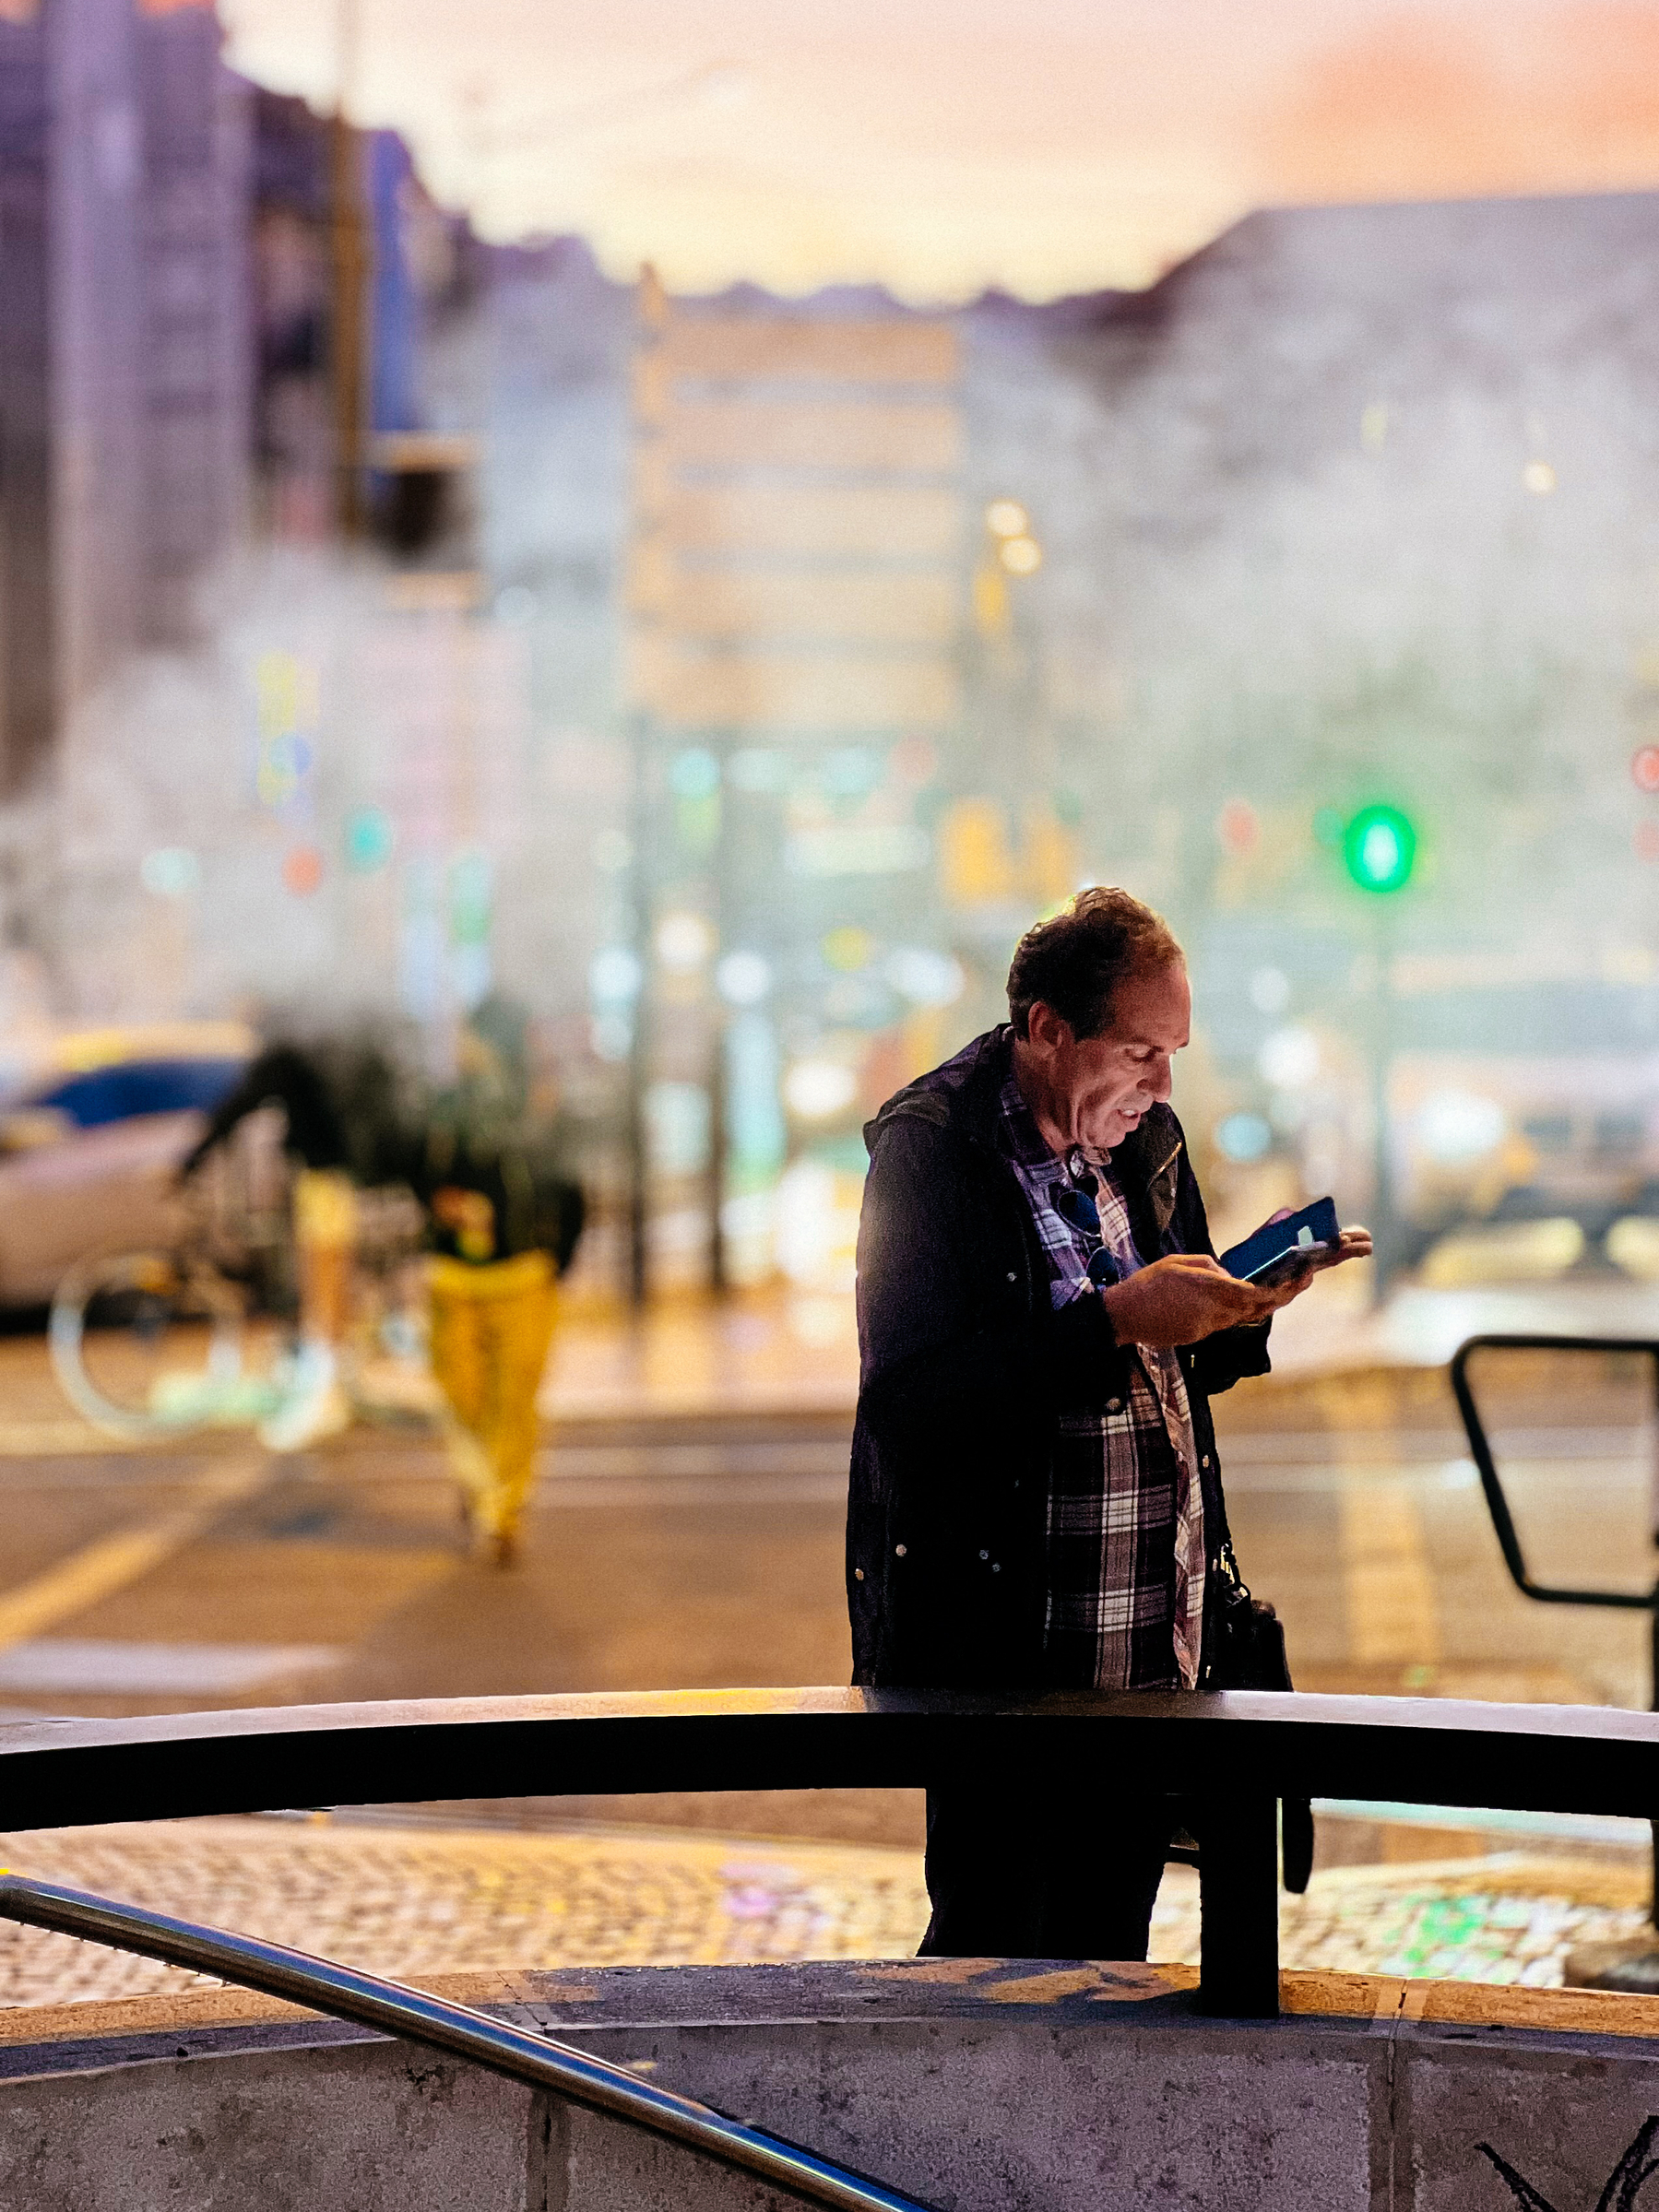 A man uses his cellphone. Smoke in the air. 